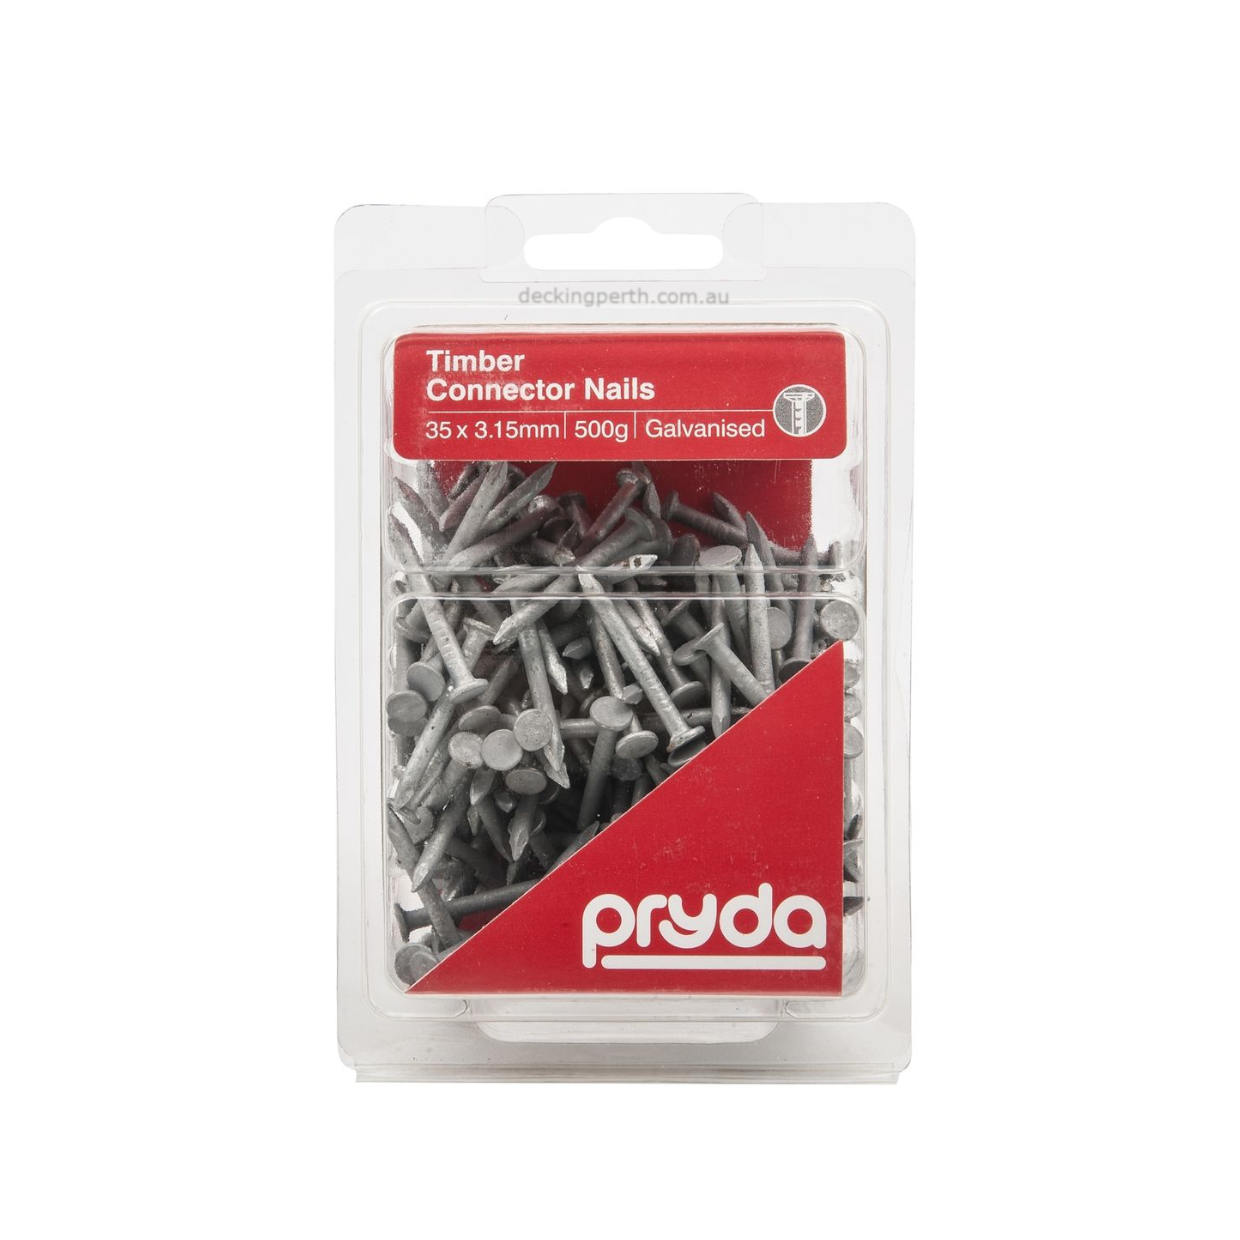    Pryda_Galvanised_Nail_Connector_35x3.15mm_500g_Decking_Perth_1